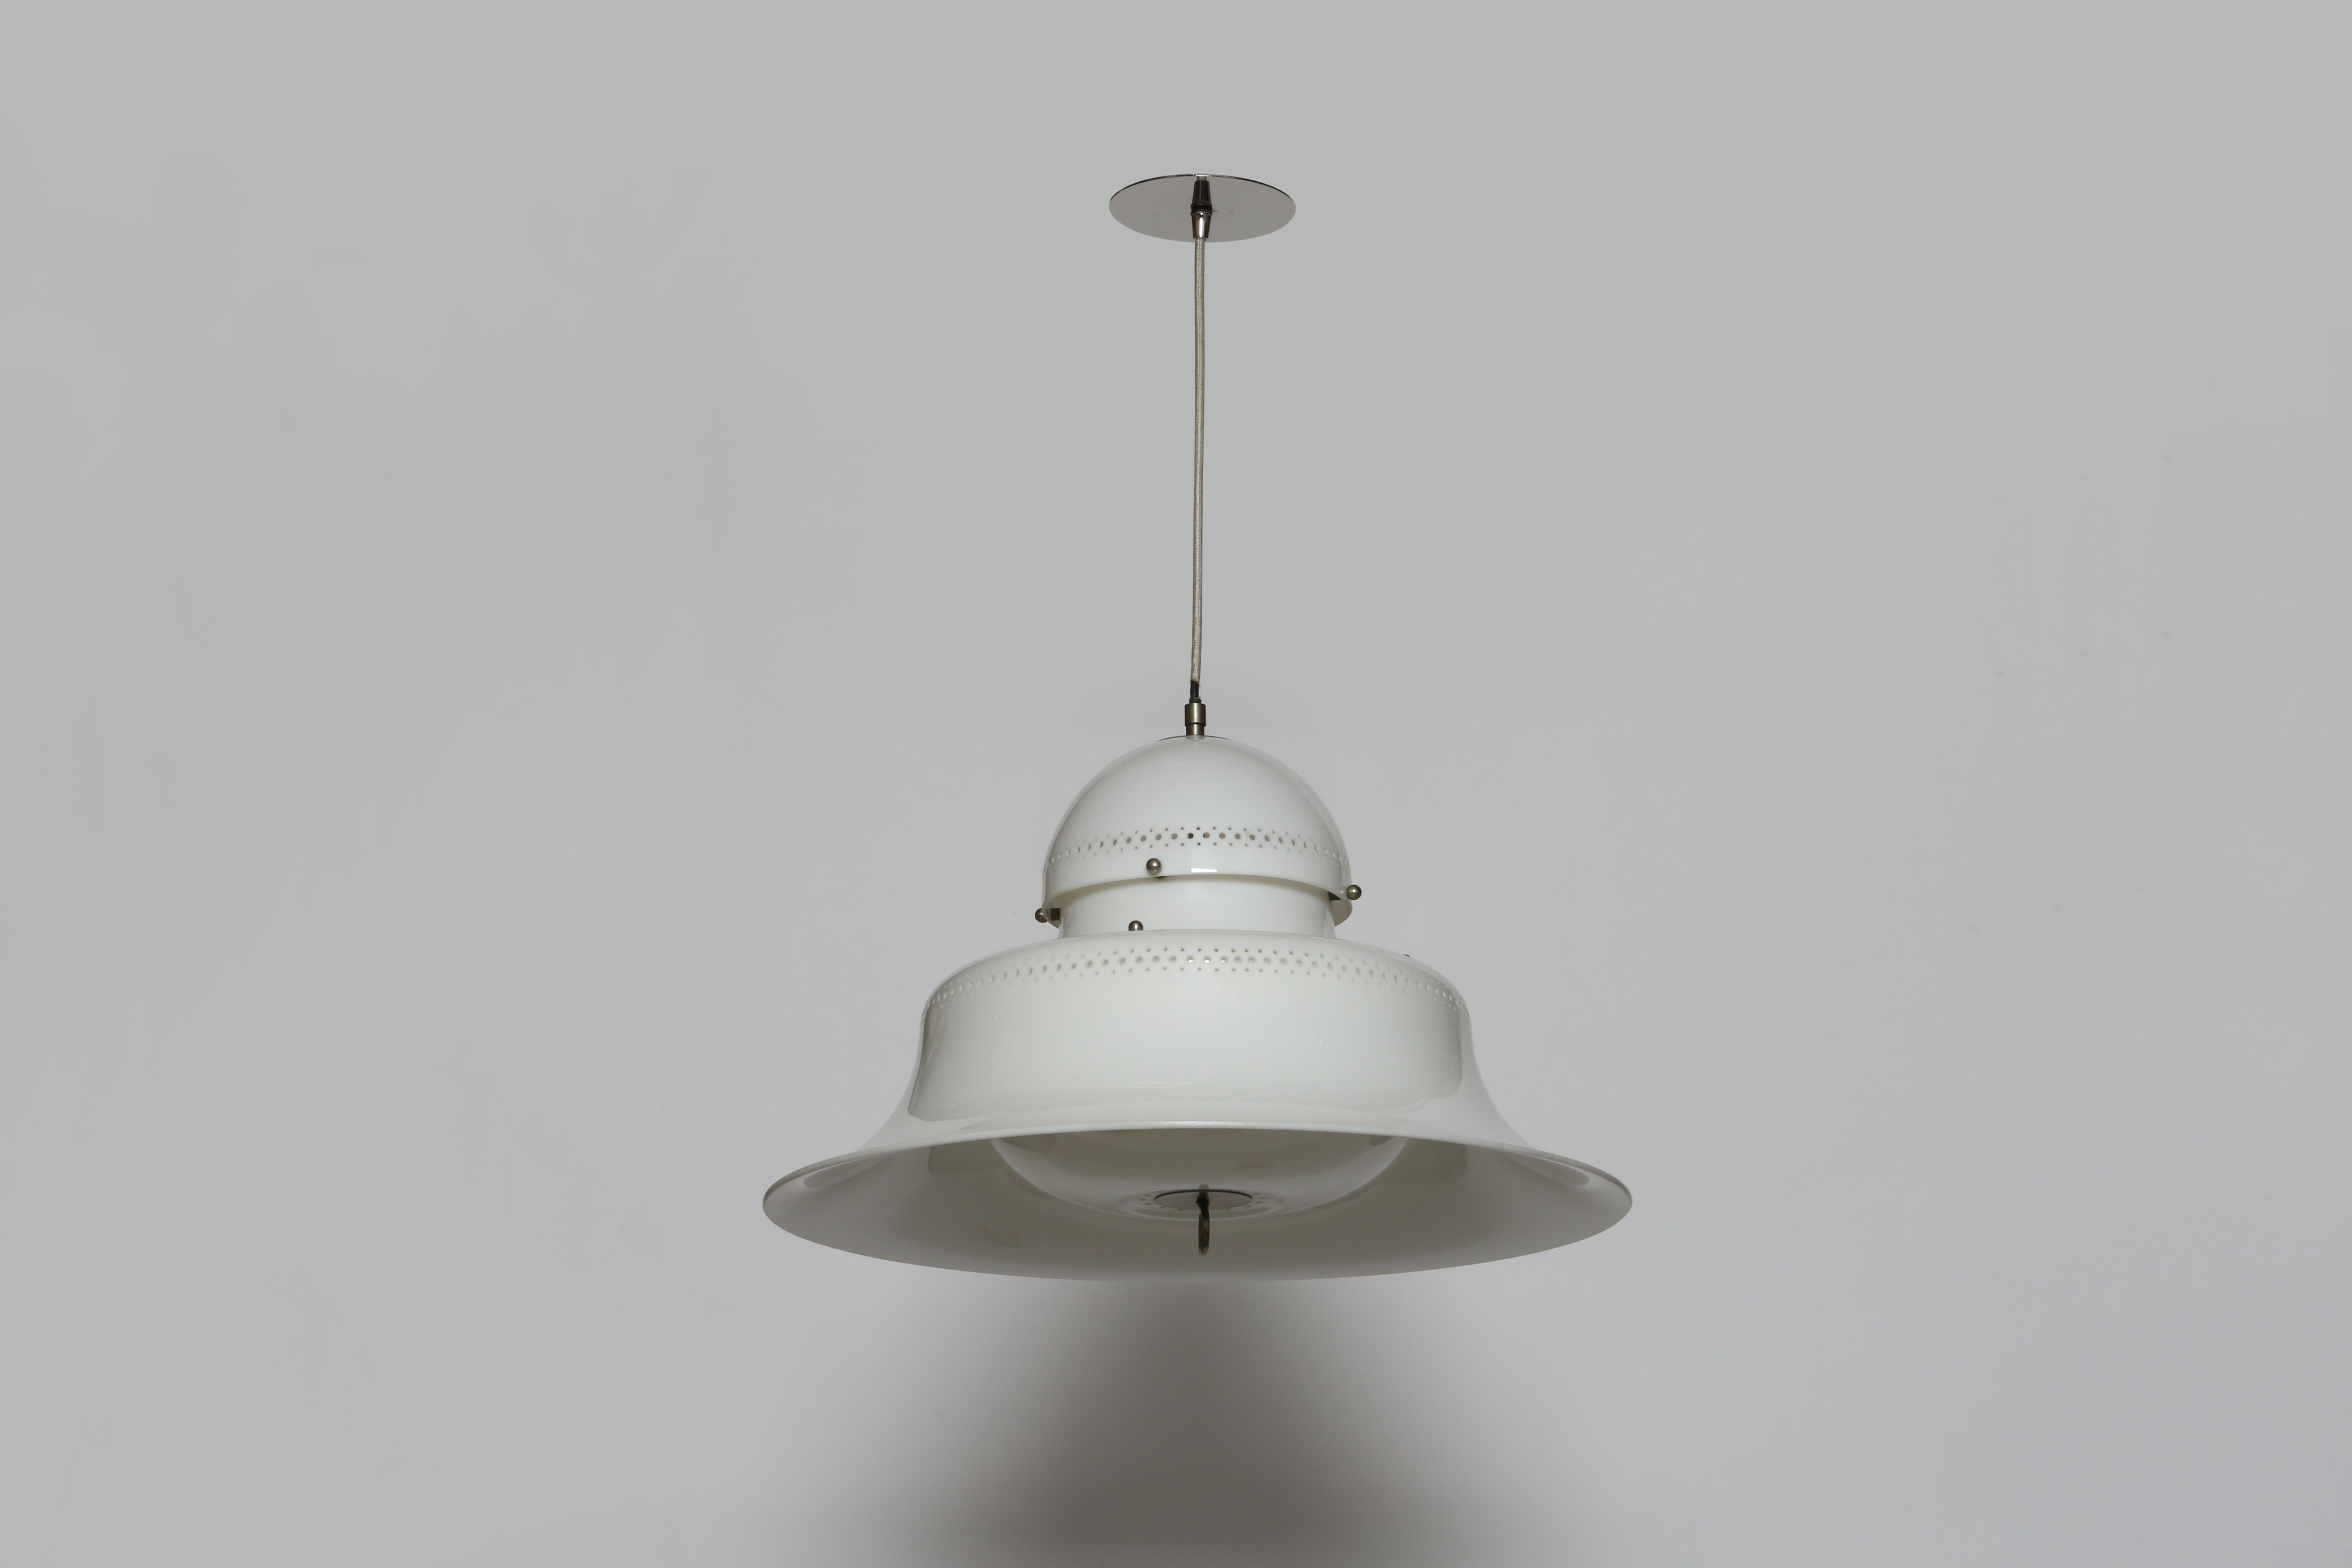 Sergio Asti for Kartell ceiling light model KD14 In Good Condition For Sale In Brooklyn, NY